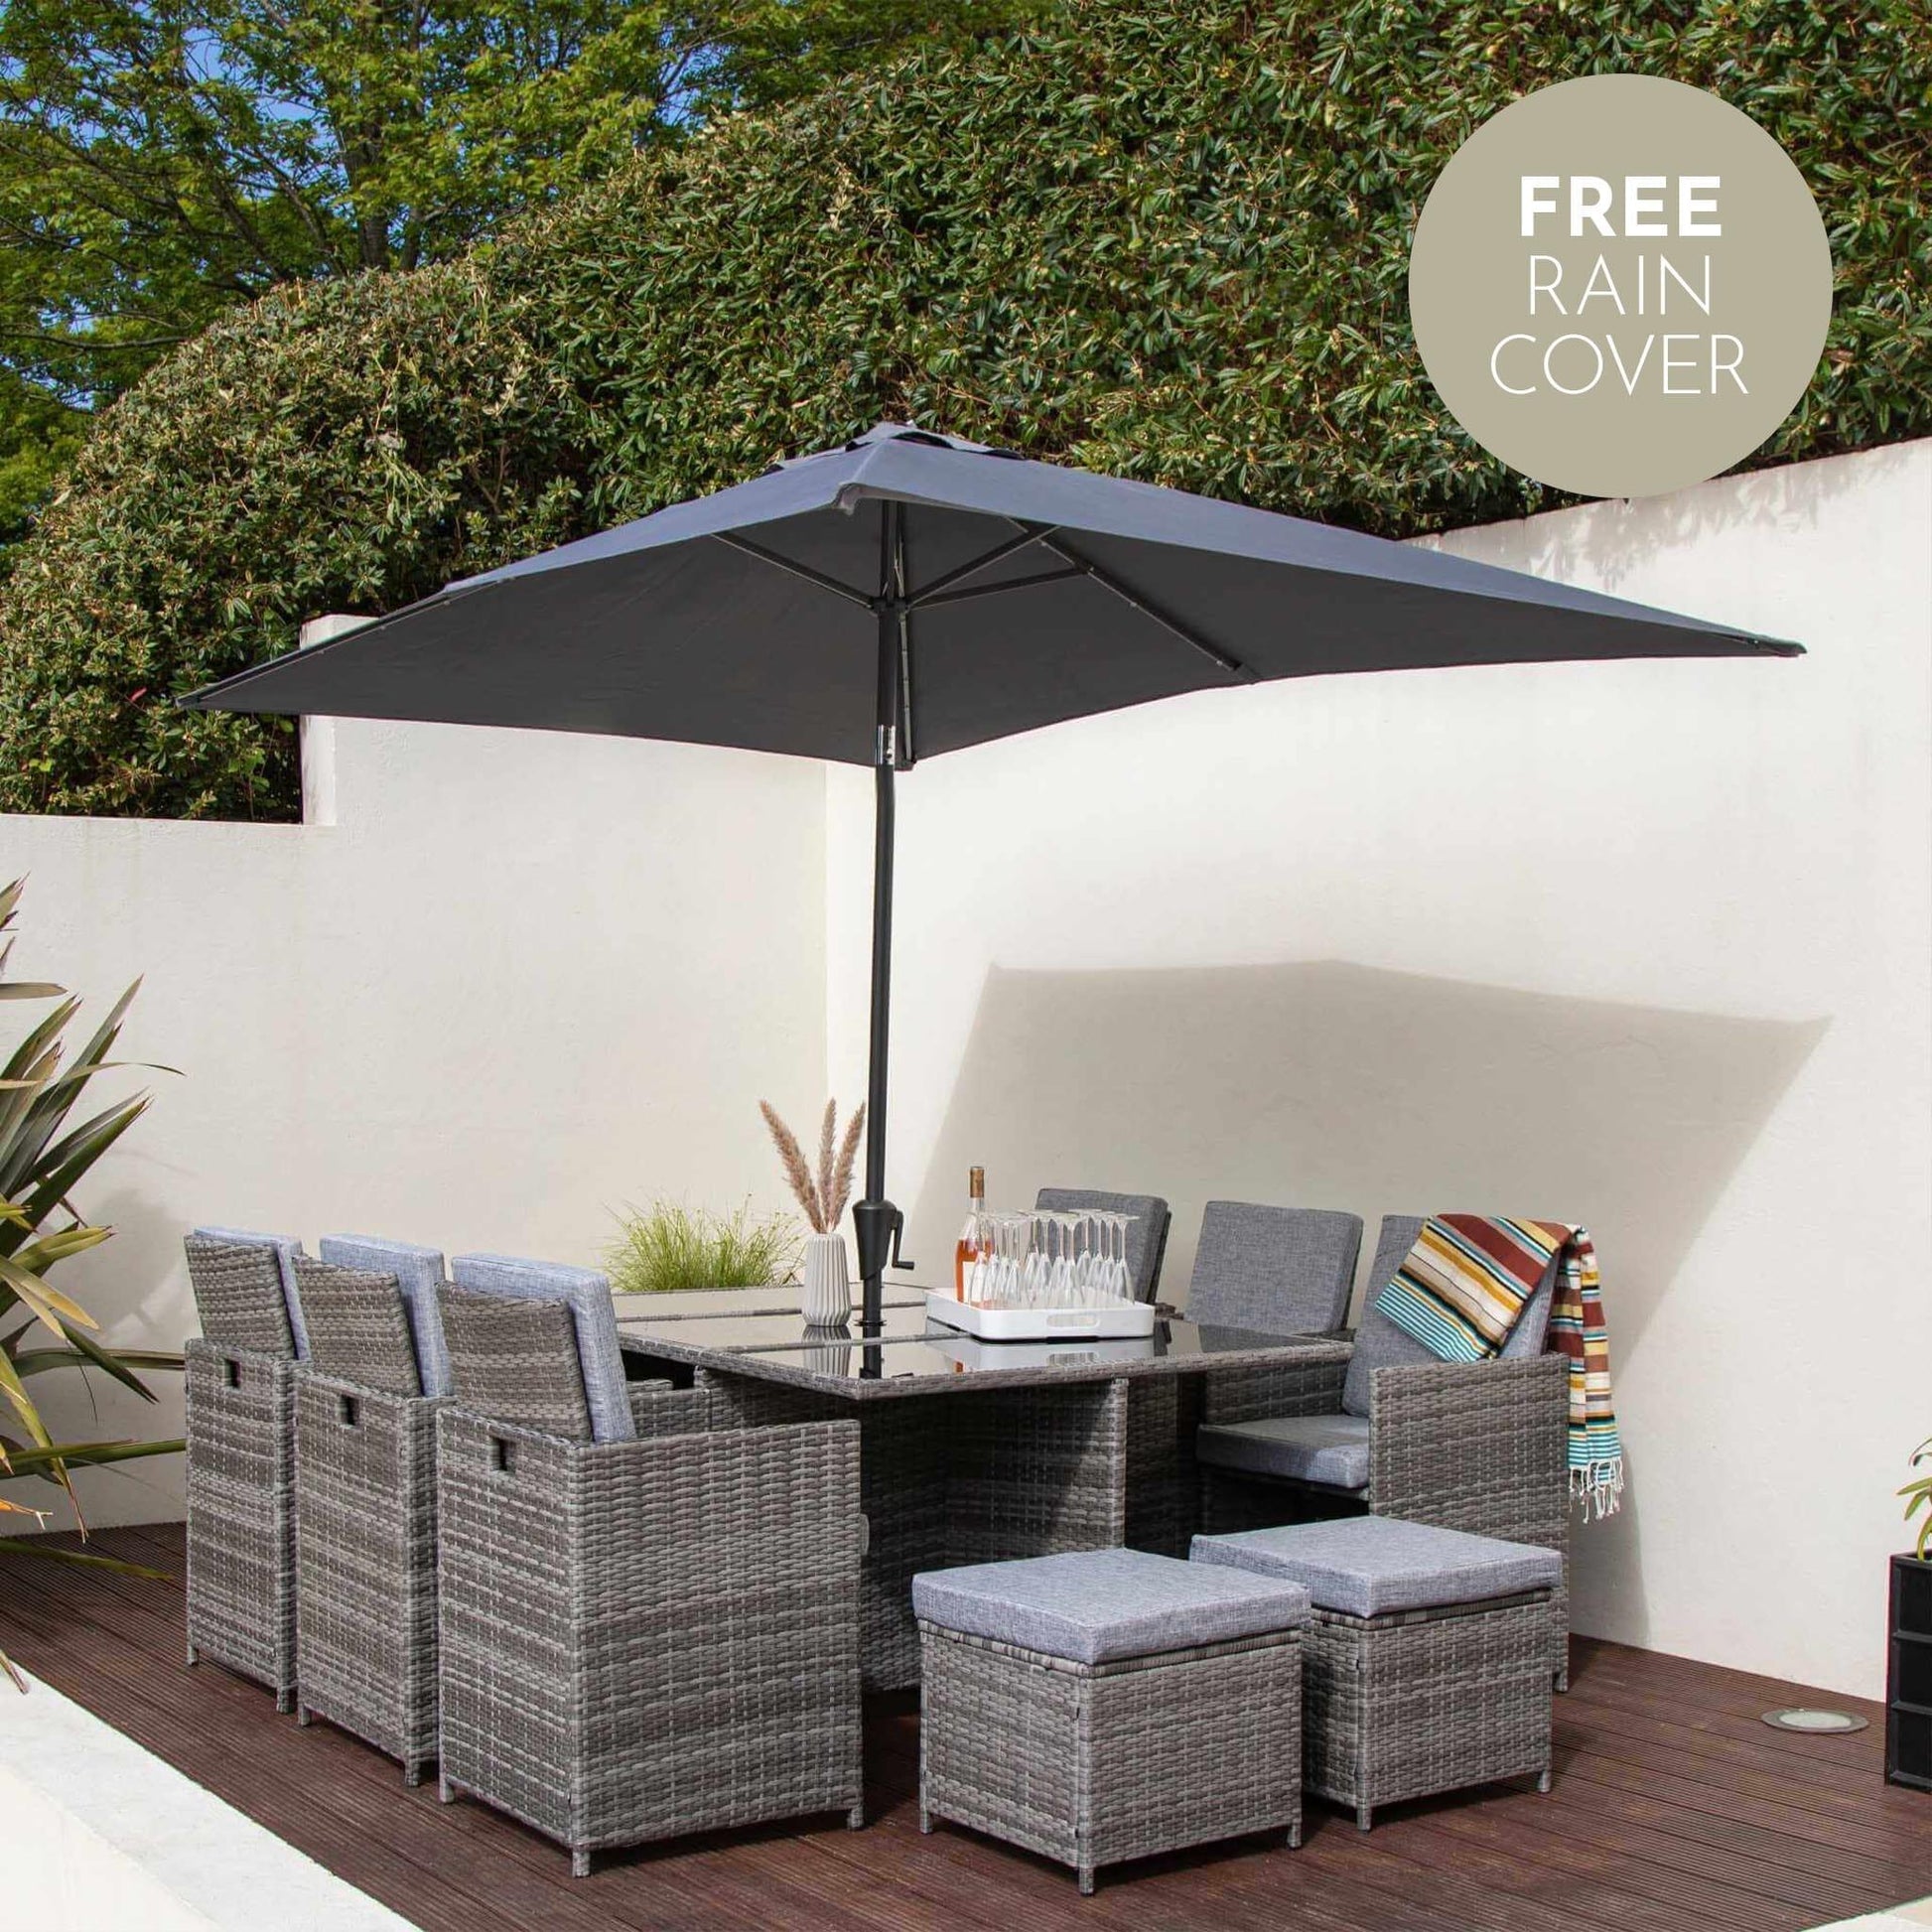 10 Seat Rattan Cube Outdoor Dining Set with LED Premium Parasol - Grey Weave - Laura James